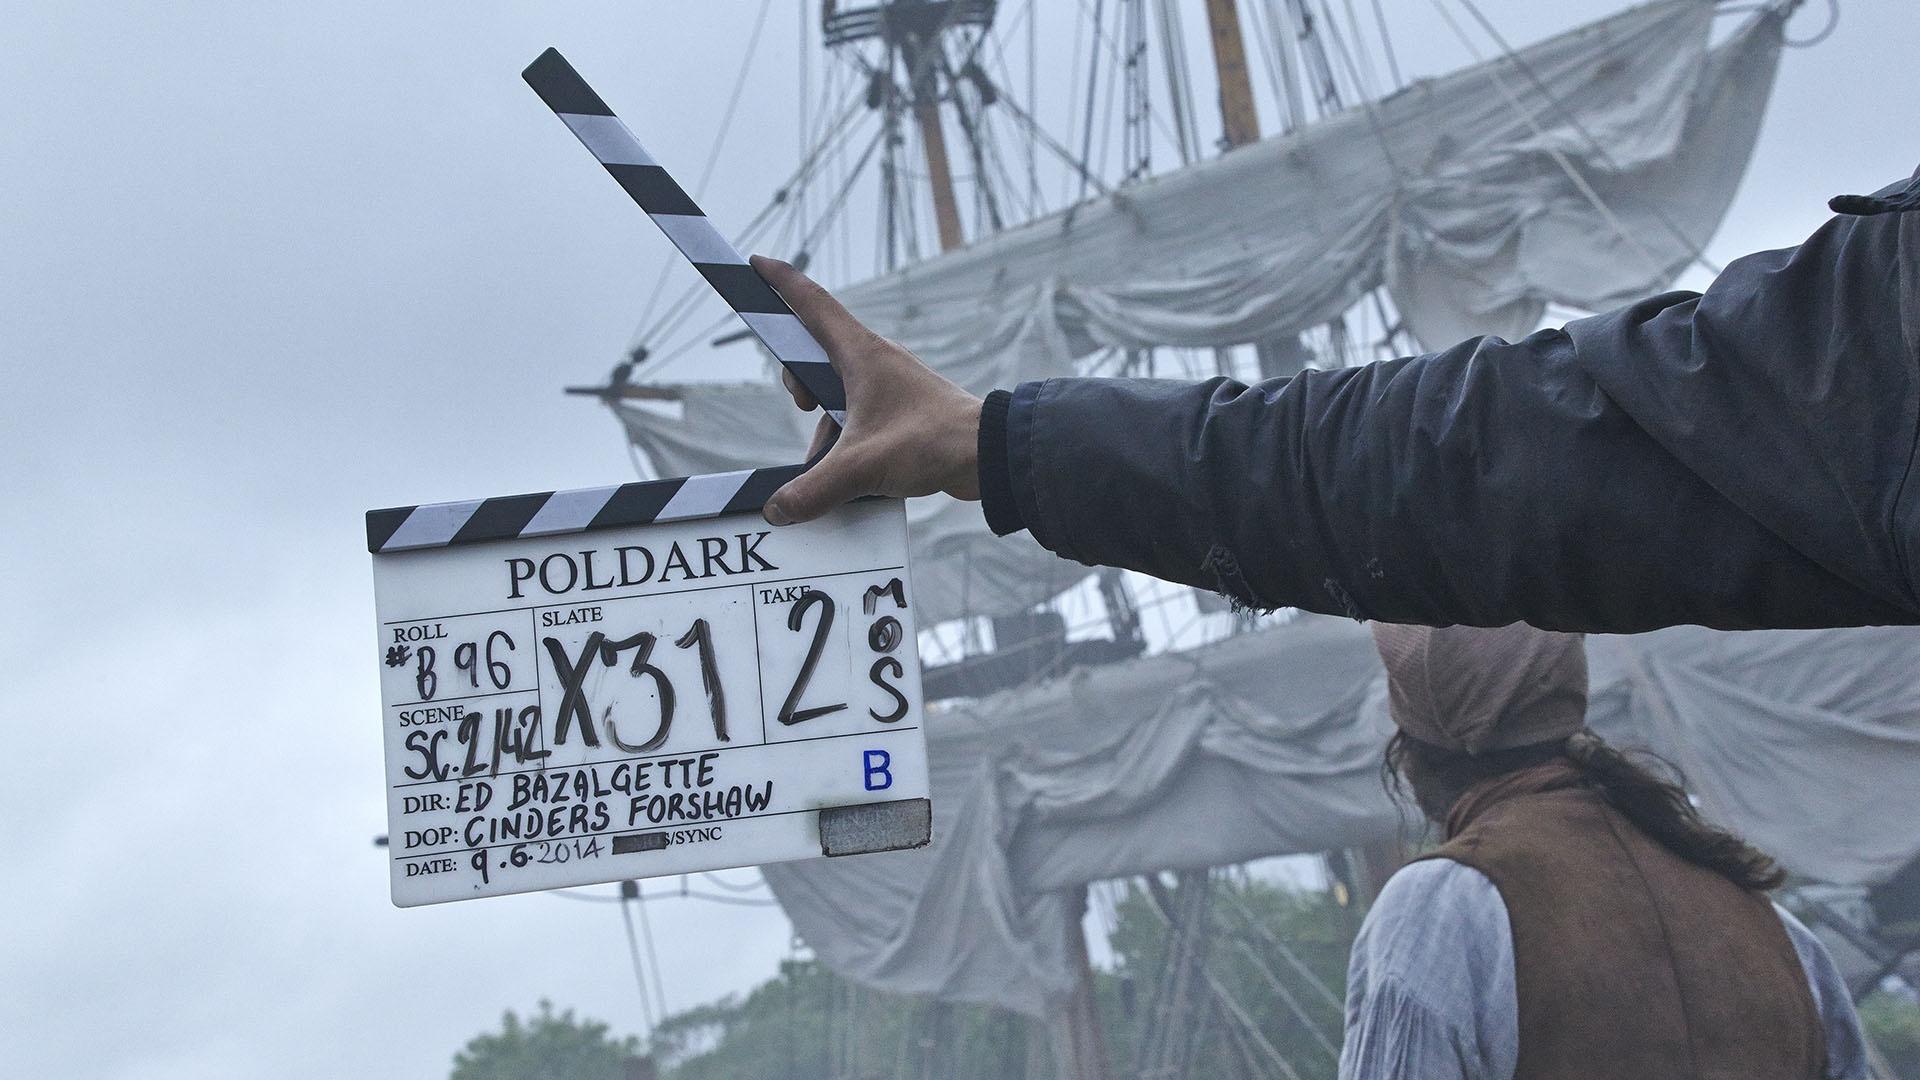 The Poldark clapperboard in front of tall ships.